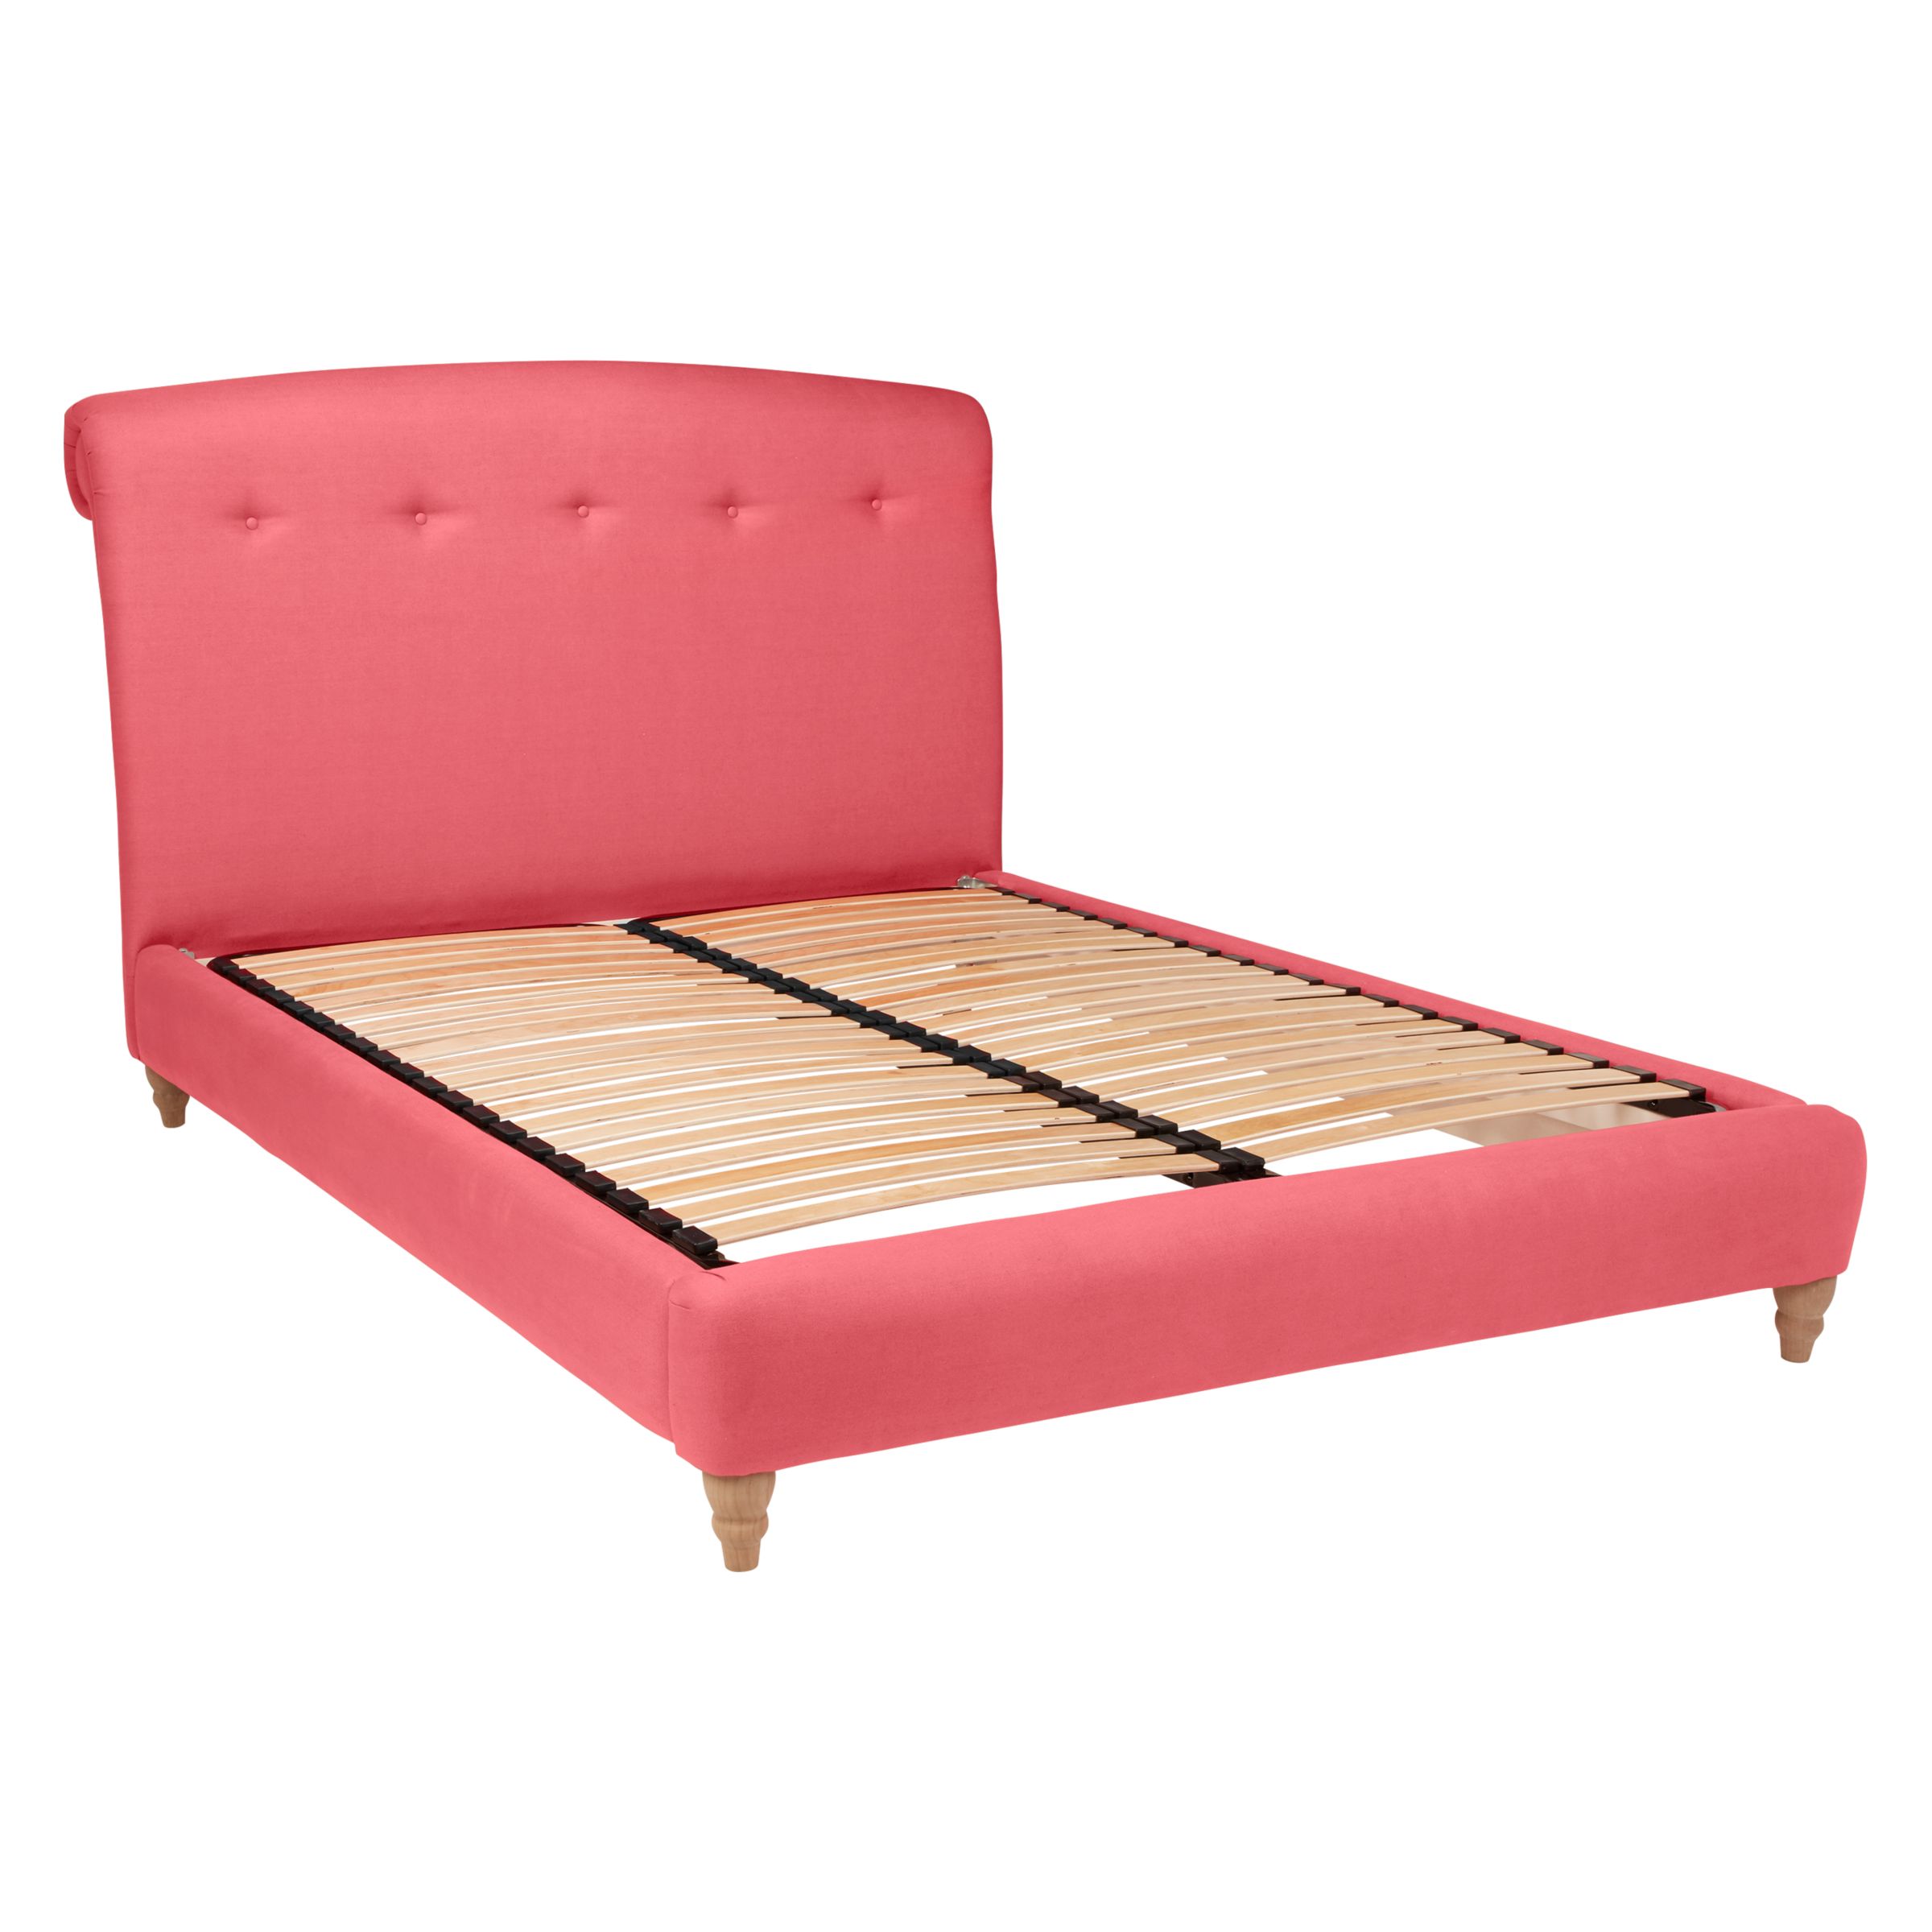 Peachy Bed Frame by Loaf at John Lewis in Clever Linen, Super King Size